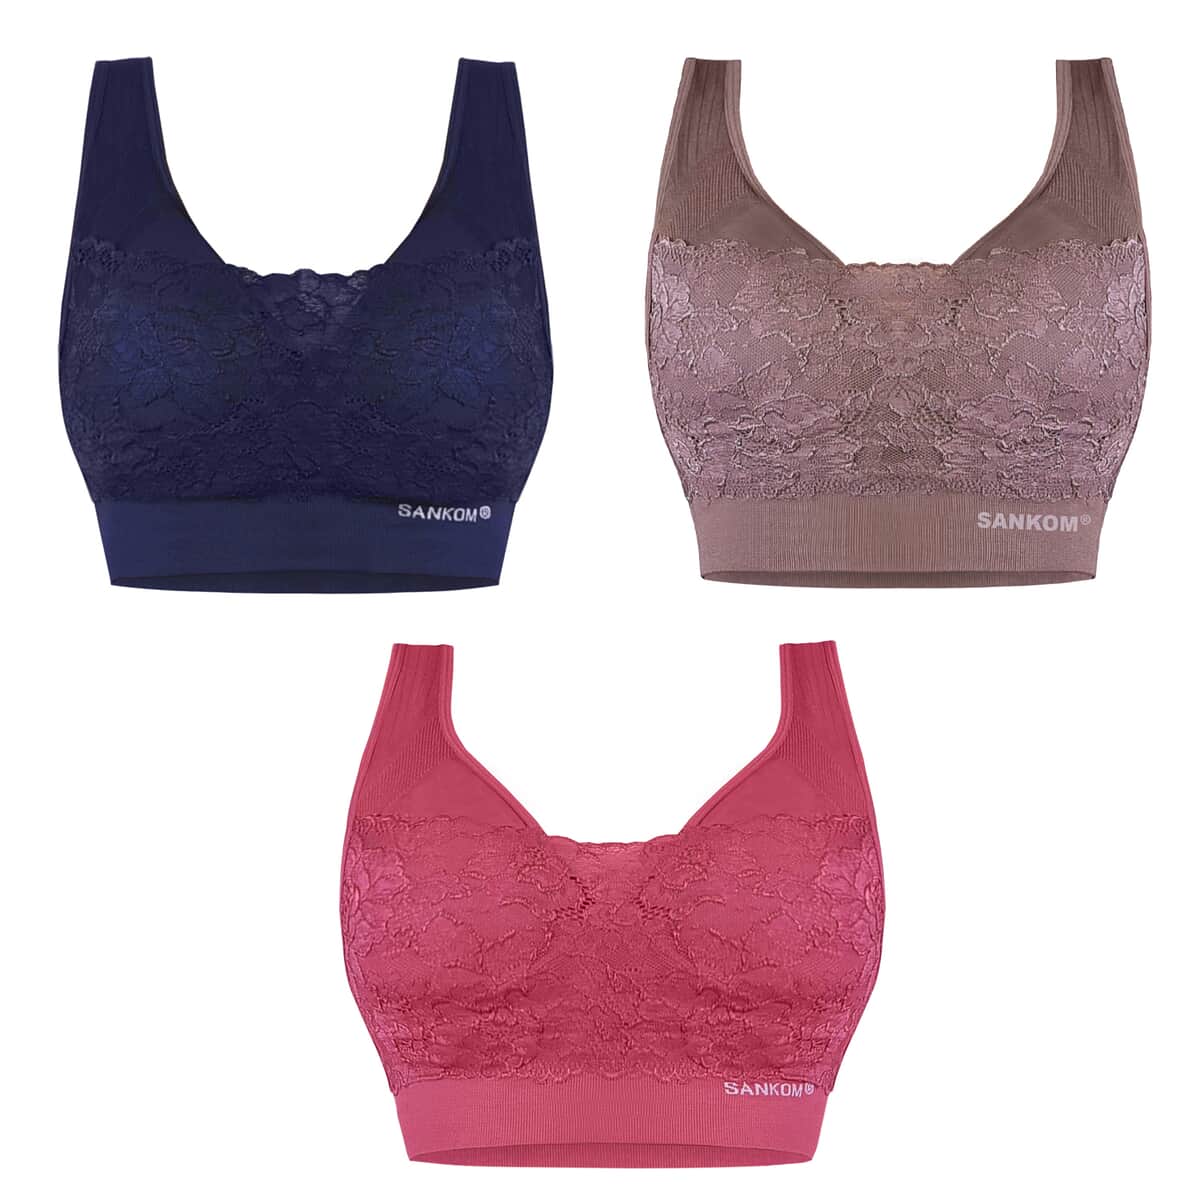 SANKOM Set of 3 Patent Classic Support & Posture Lace Bras - S/M | Navy, Cocoa, and Rose image number 0